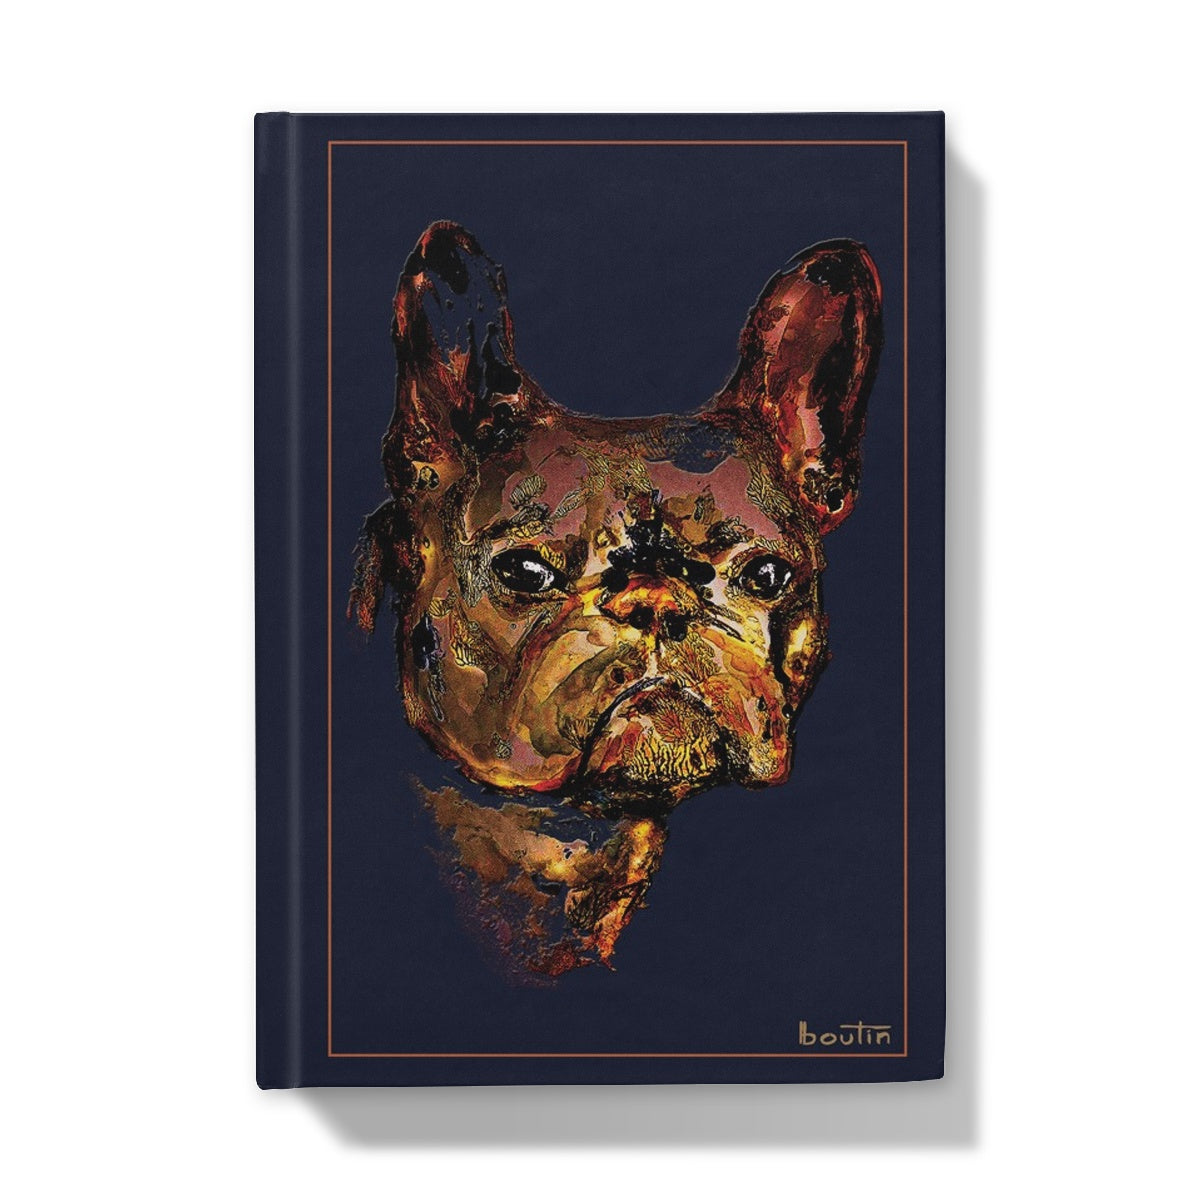 King George Marine - Notebook by the artist Boutin